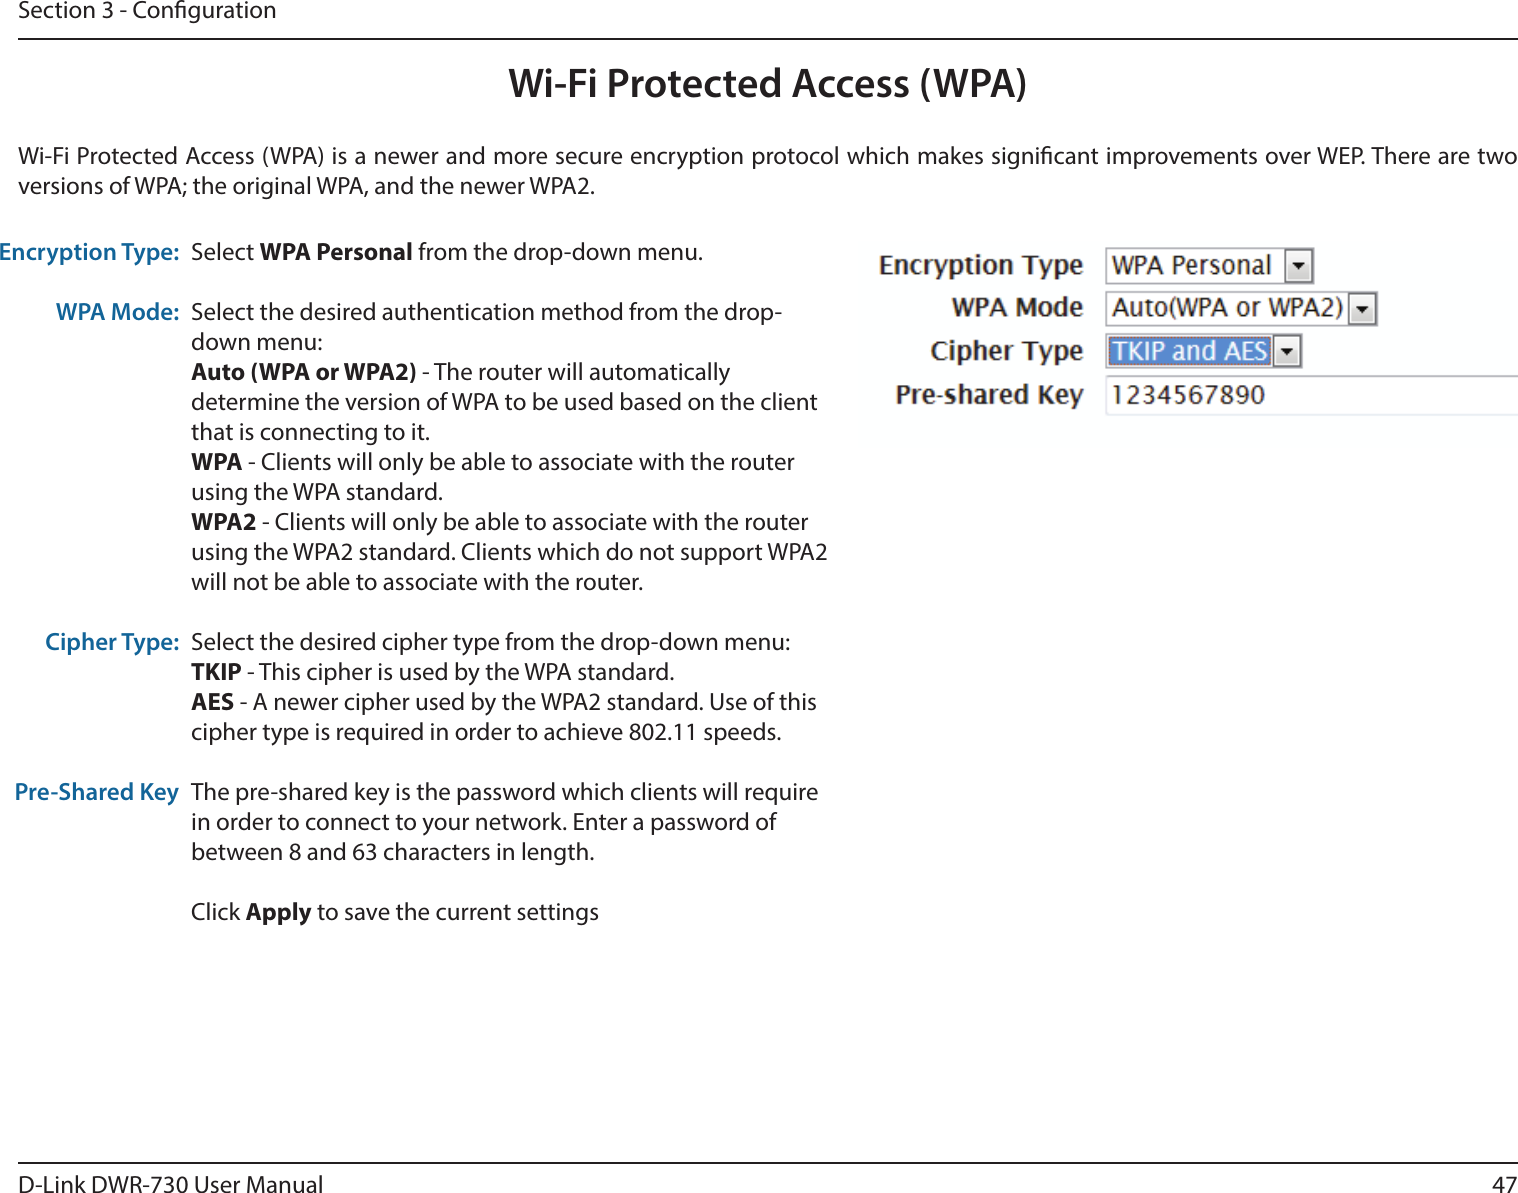 47D-Link DWR-730 User ManualSection 3 - CongurationWi-Fi Protected Access (WPA)Wi-Fi Protected Access (WPA) is a newer and more secure encryption protocol which makes signicant improvements over WEP. There are two versions of WPA; the original WPA, and the newer WPA2. Encryption Type:WPA Mode:Cipher Type:Pre-Shared KeySelect WPA Personal from the drop-down menu.Select the desired authentication method from the drop-down menu:Auto (WPA or WPA2) - The router will automatically determine the version of WPA to be used based on the client that is connecting to it. WPA - Clients will only be able to associate with the router using the WPA standard. WPA2 - Clients will only be able to associate with the router using the WPA2 standard. Clients which do not support WPA2 will not be able to associate with the router. Select the desired cipher type from the drop-down menu:TKIP - This cipher is used by the WPA standard. AES - A newer cipher used by the WPA2 standard. Use of this cipher type is required in order to achieve 802.11 speeds. The pre-shared key is the password which clients will require in order to connect to your network. Enter a password of between 8 and 63 characters in length. Click Apply to save the current settings